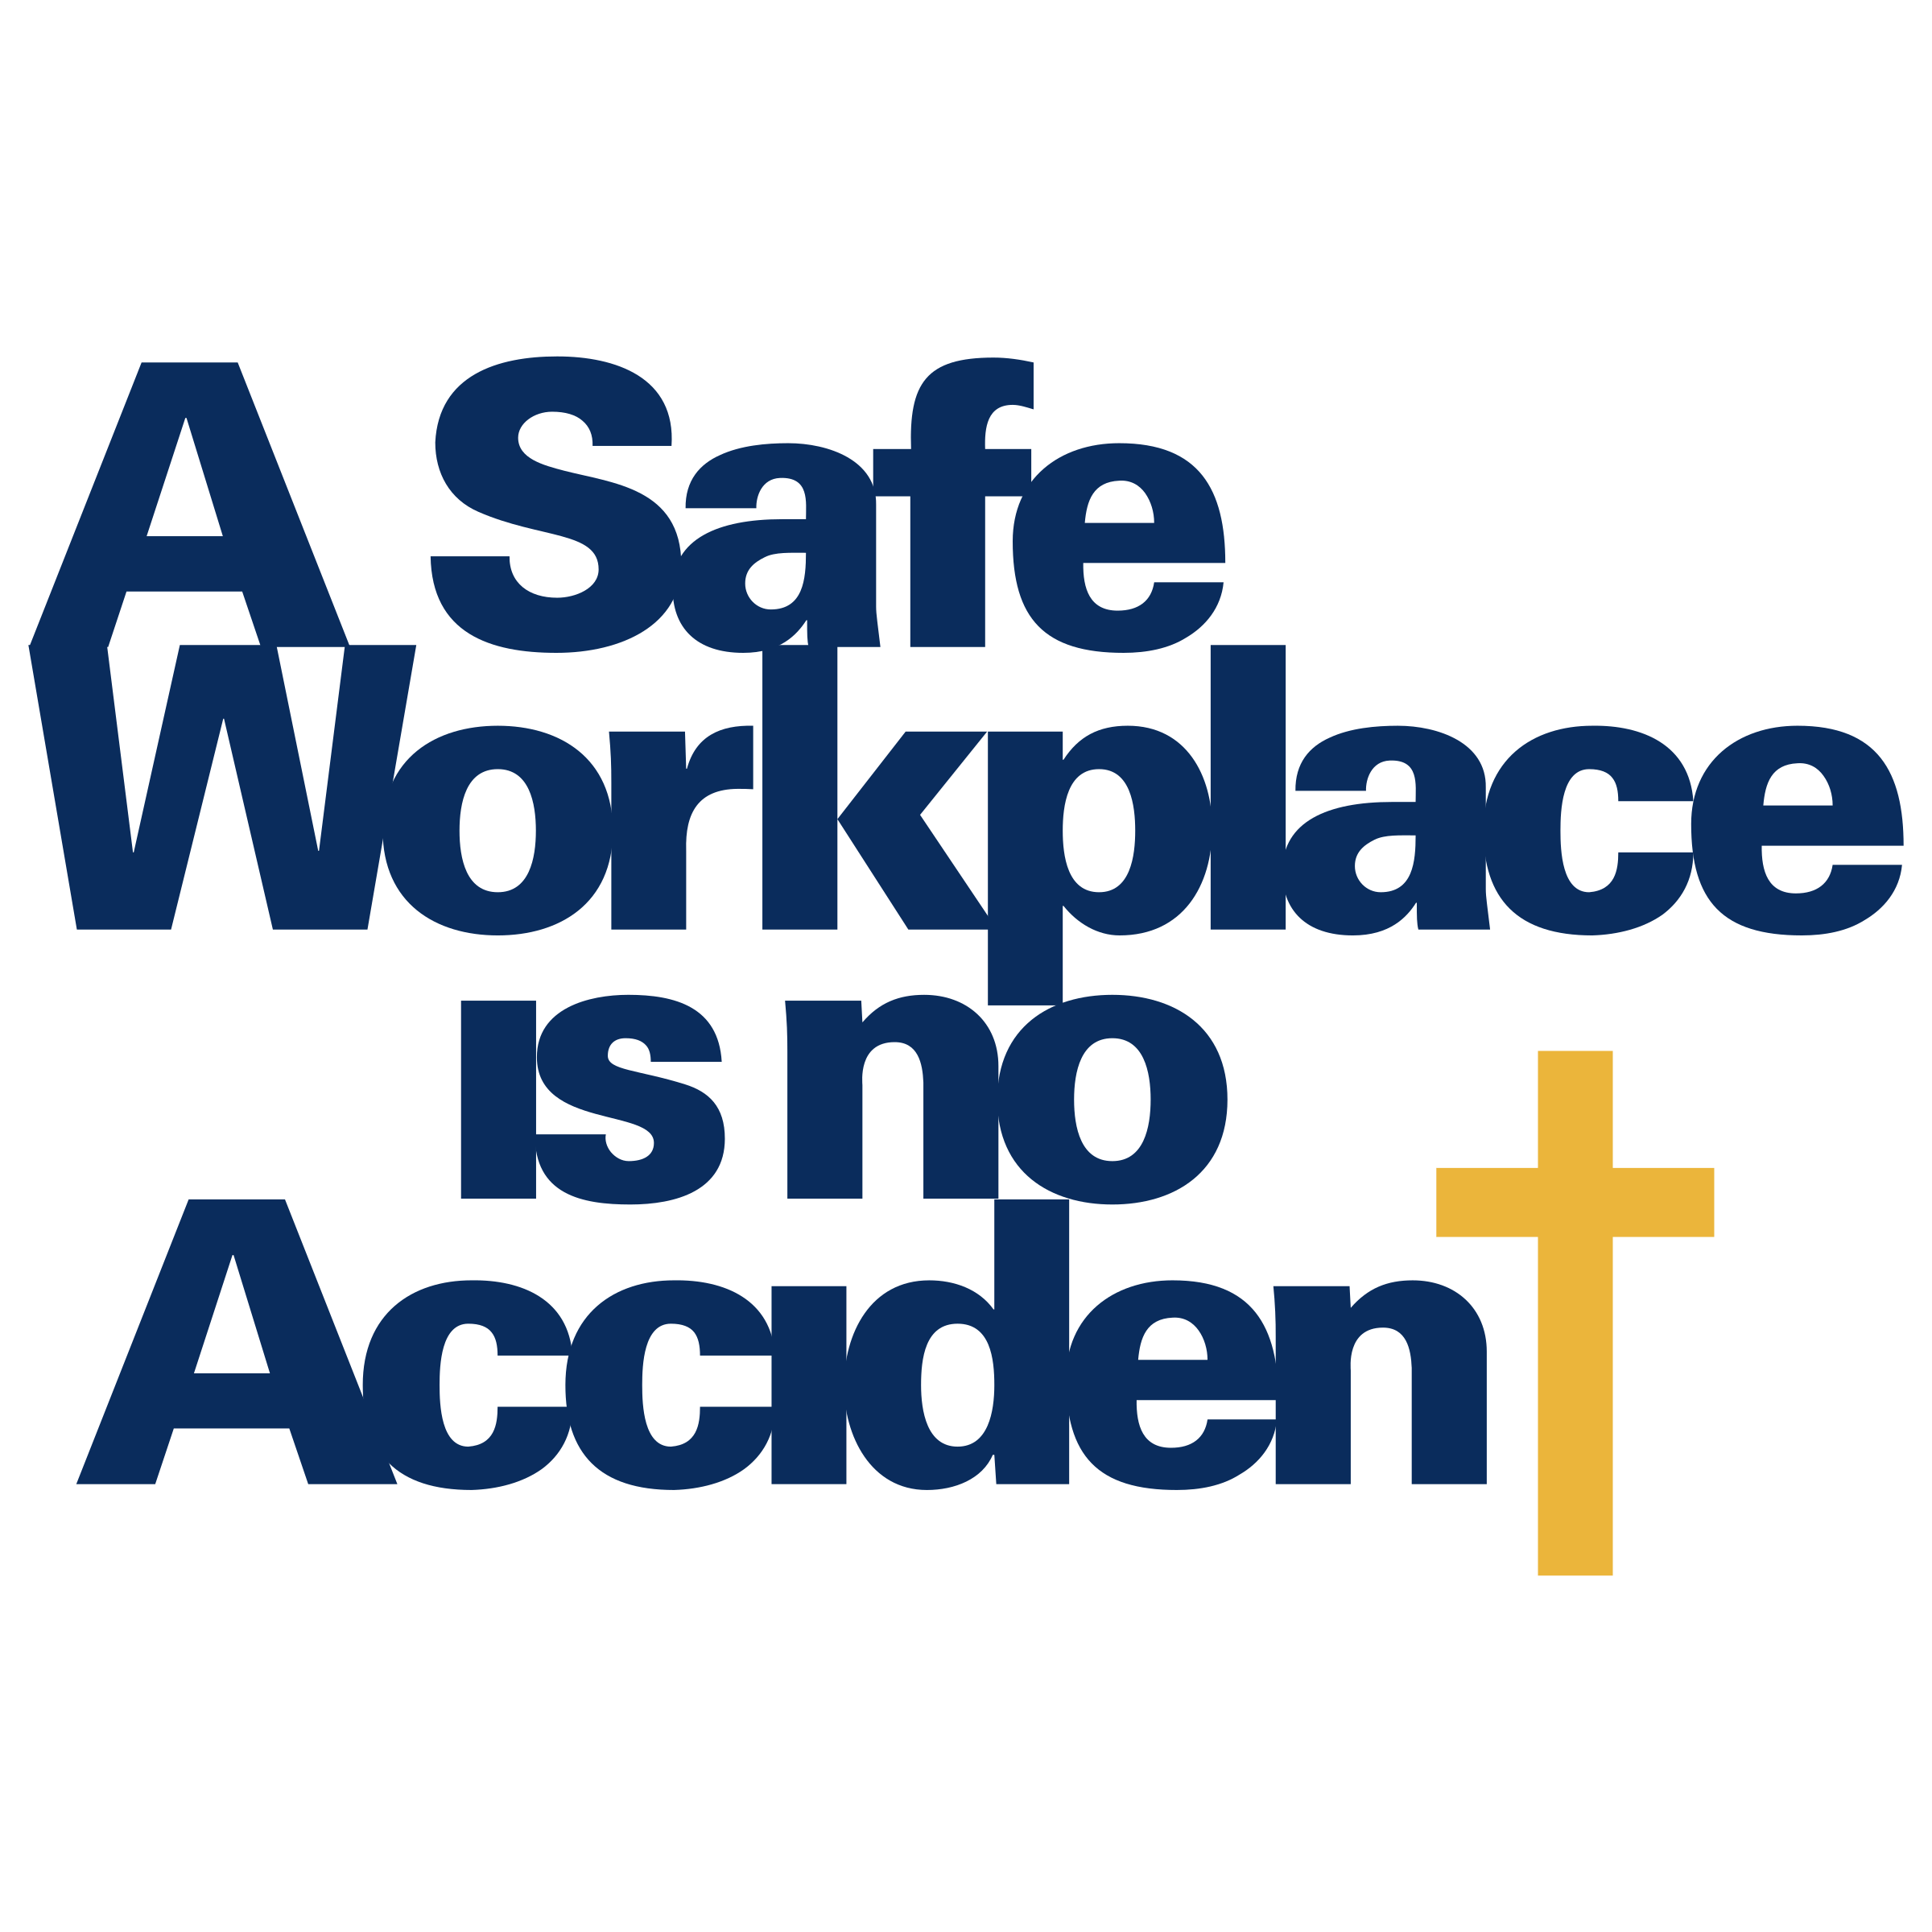 Workplace Logo - A Safe Workplace is no Accident Logo PNG Transparent & SVG Vector ...